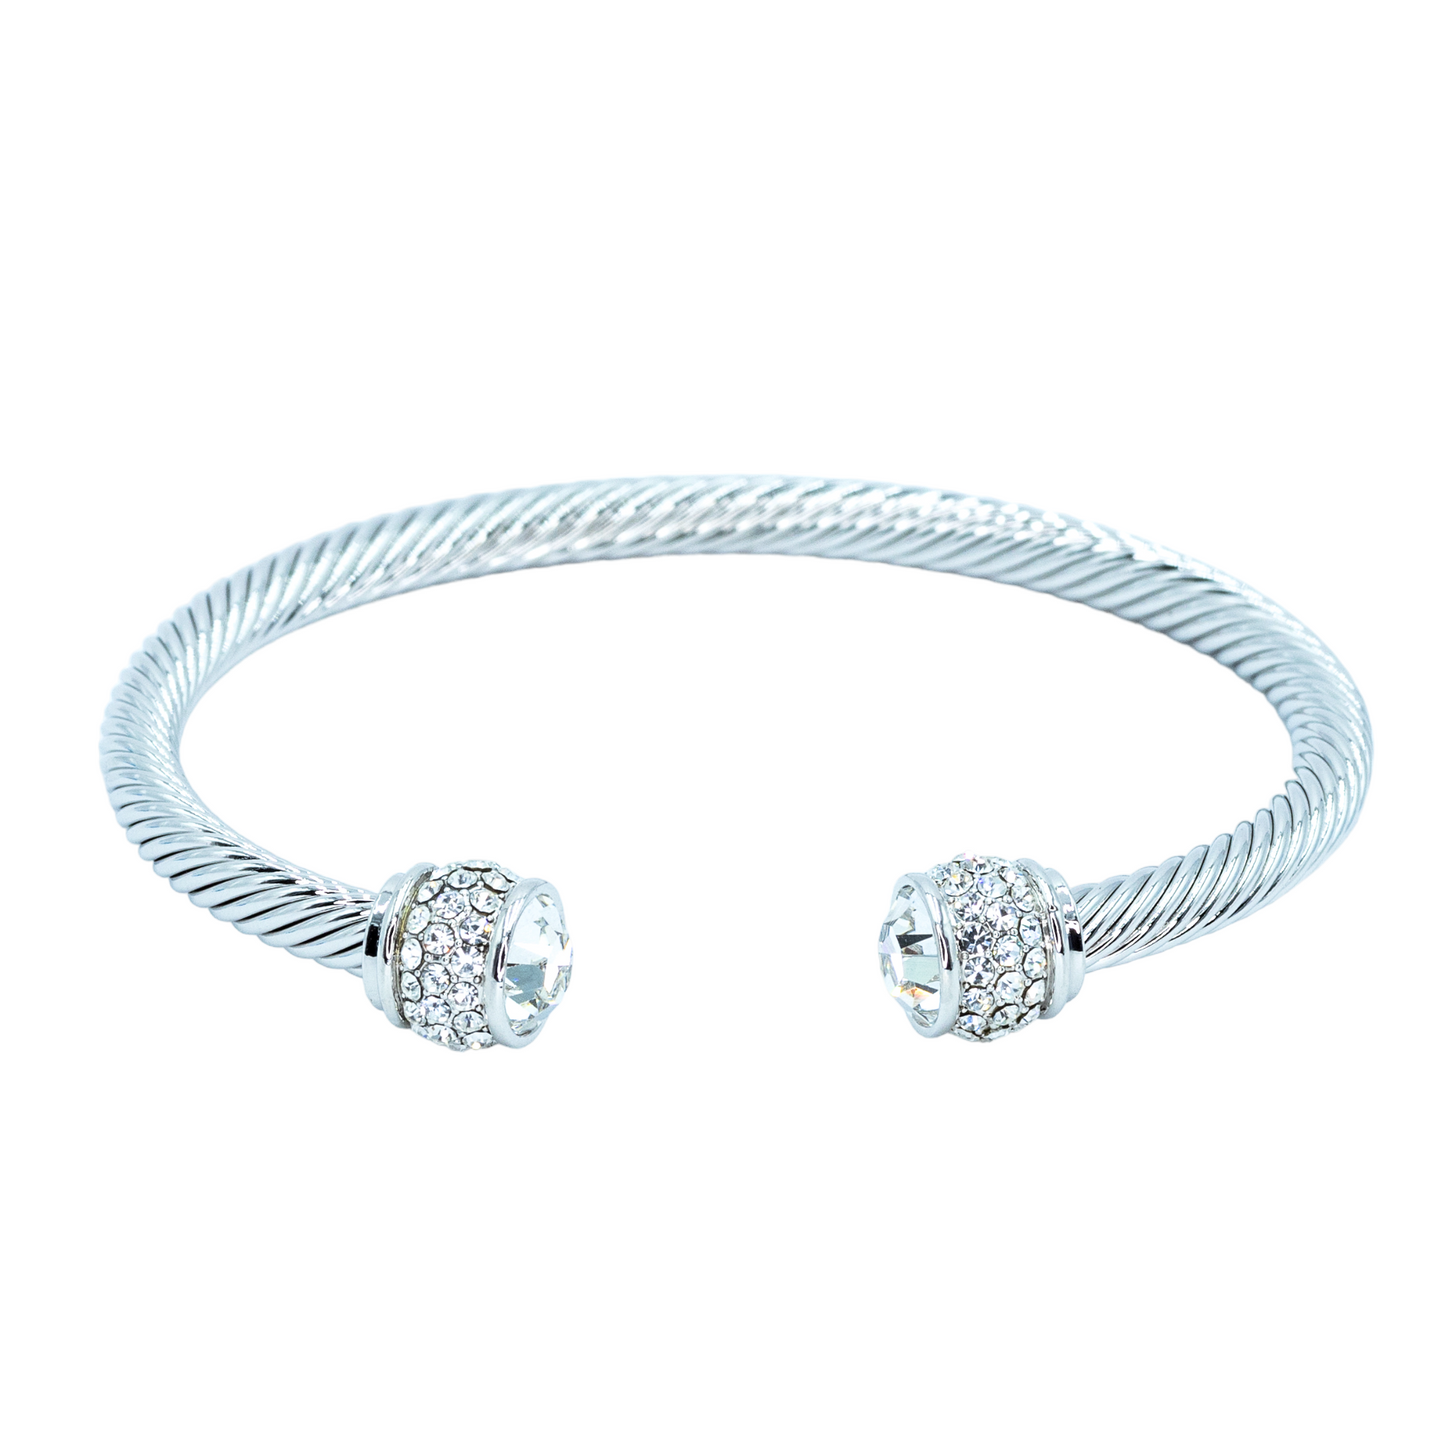 Rhodium plated bangle w/ CZ stones and clear stone